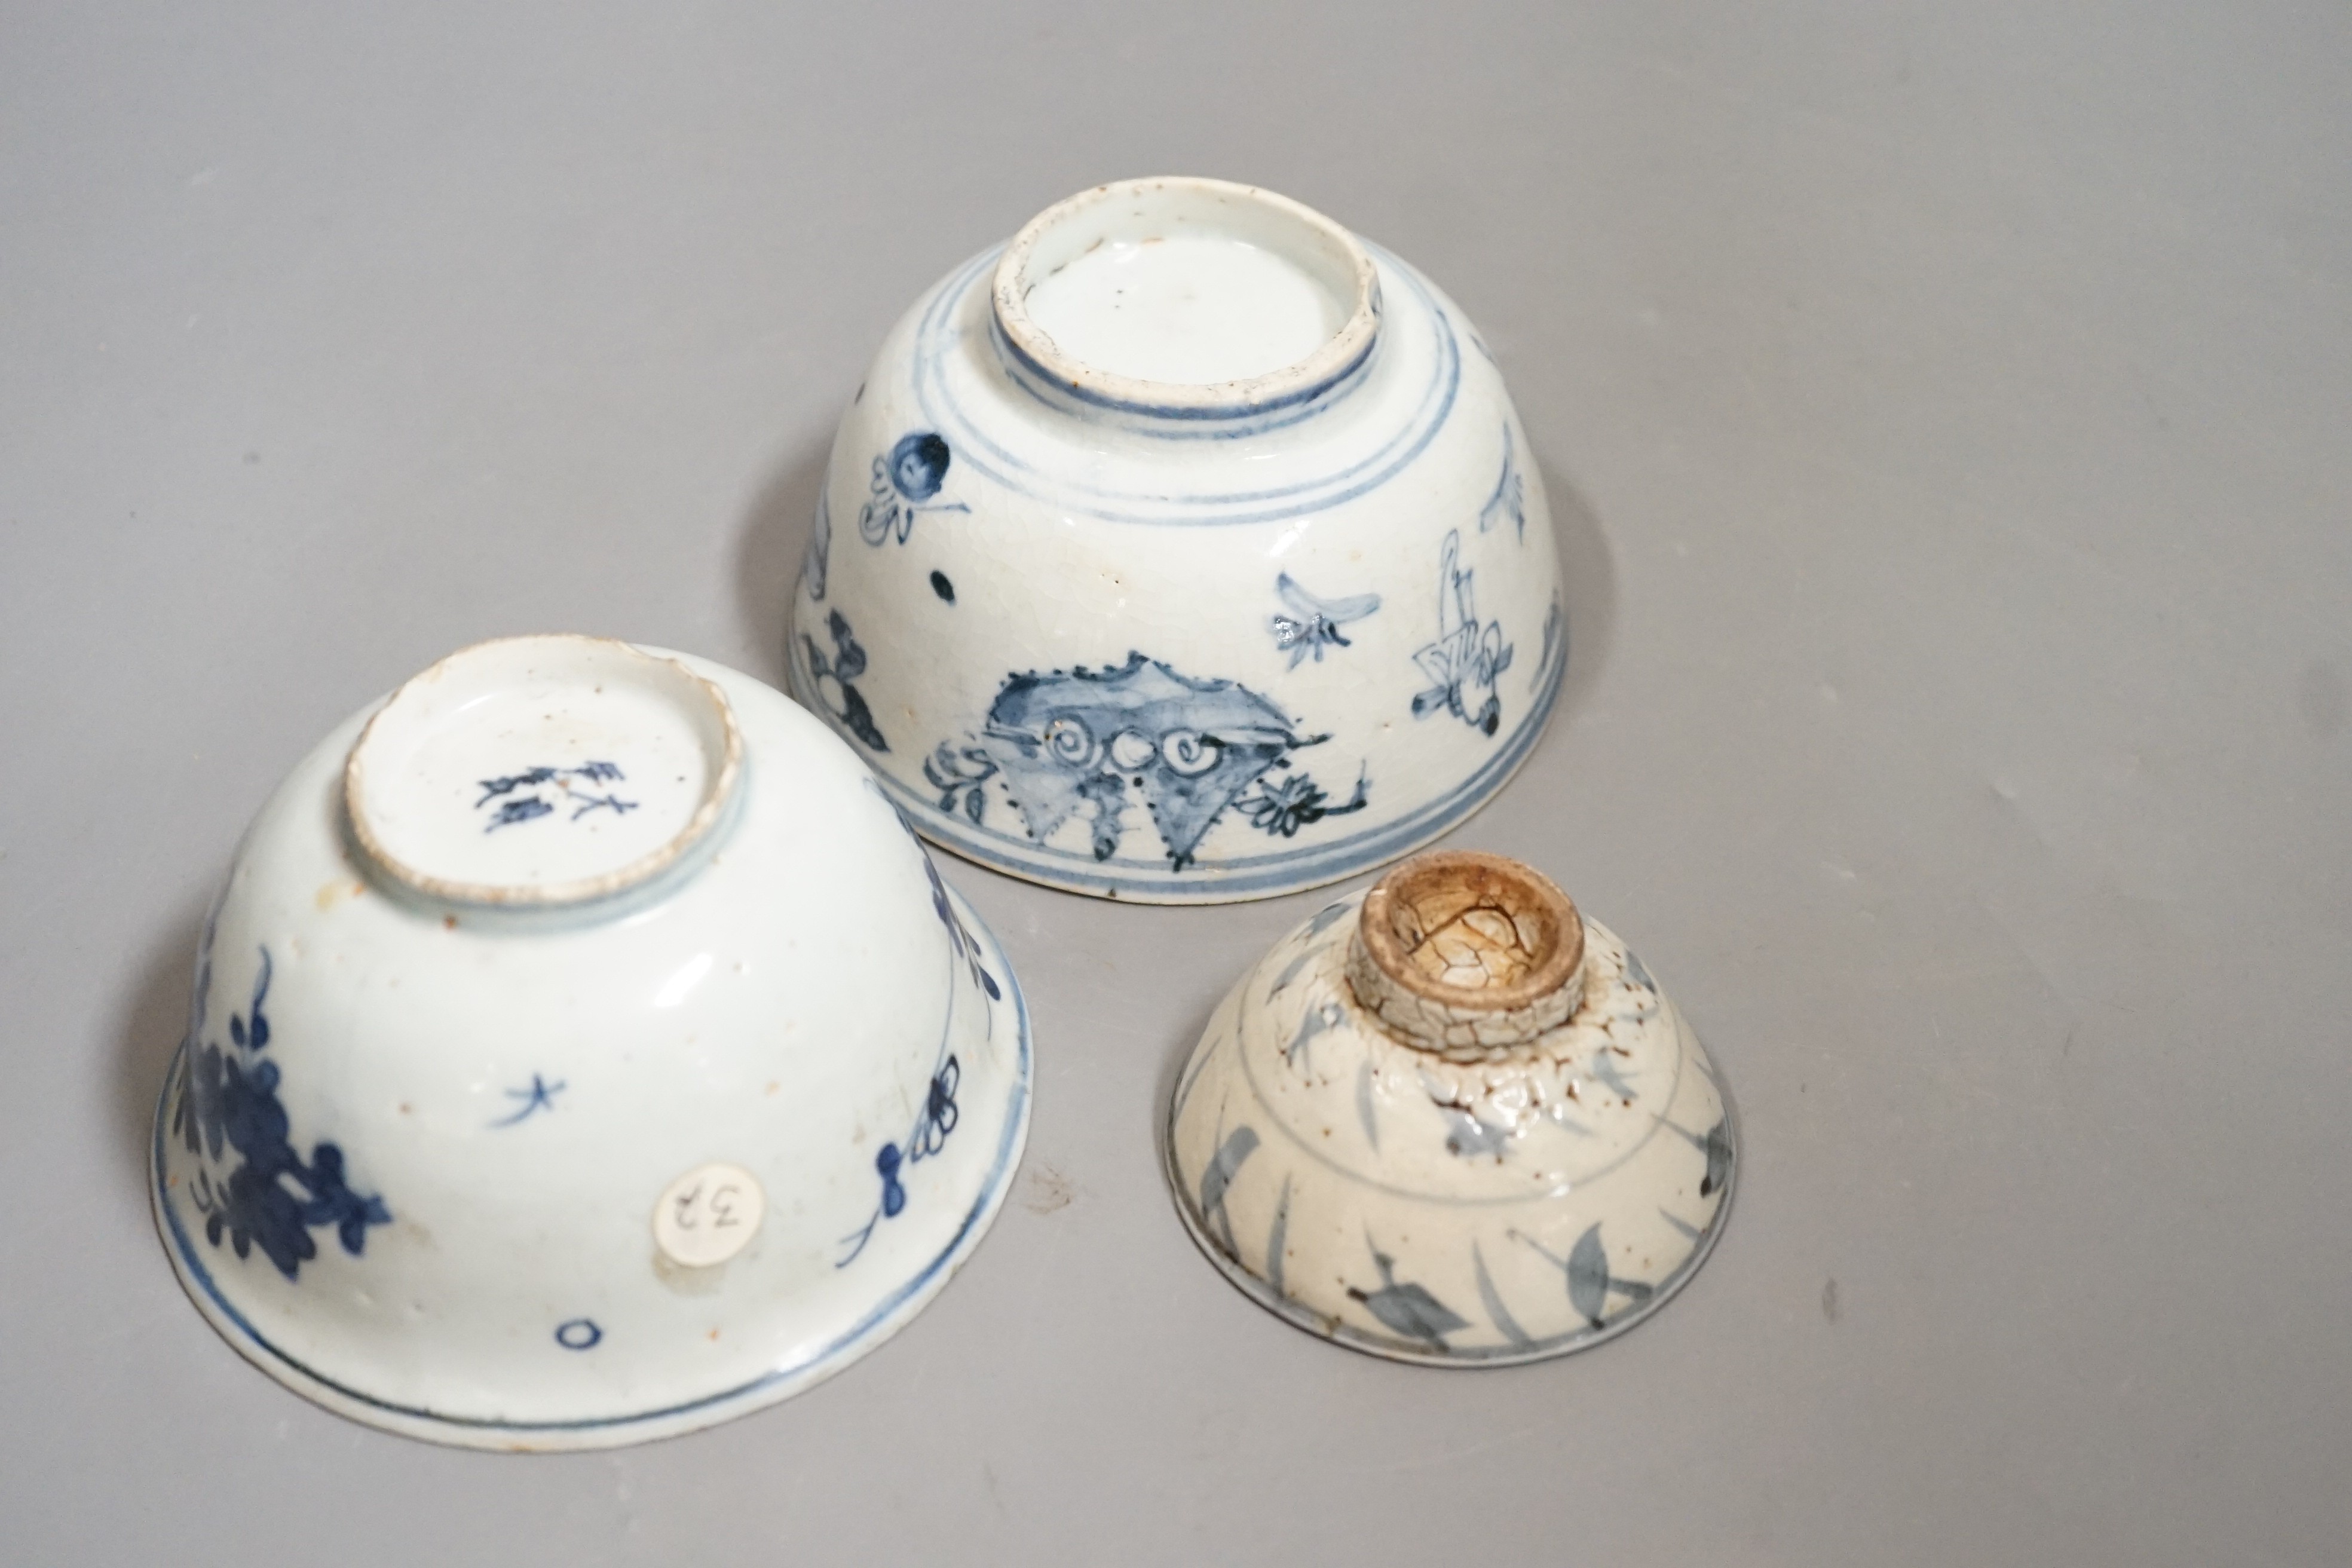 Three Chinese late Ming blue and white bowls, one painted with figures in a boat on horseback and in the landscape, the second with floral sprays, with ‘Made in the Great Ming dynasty’ mark and another bowl, largest 13.3